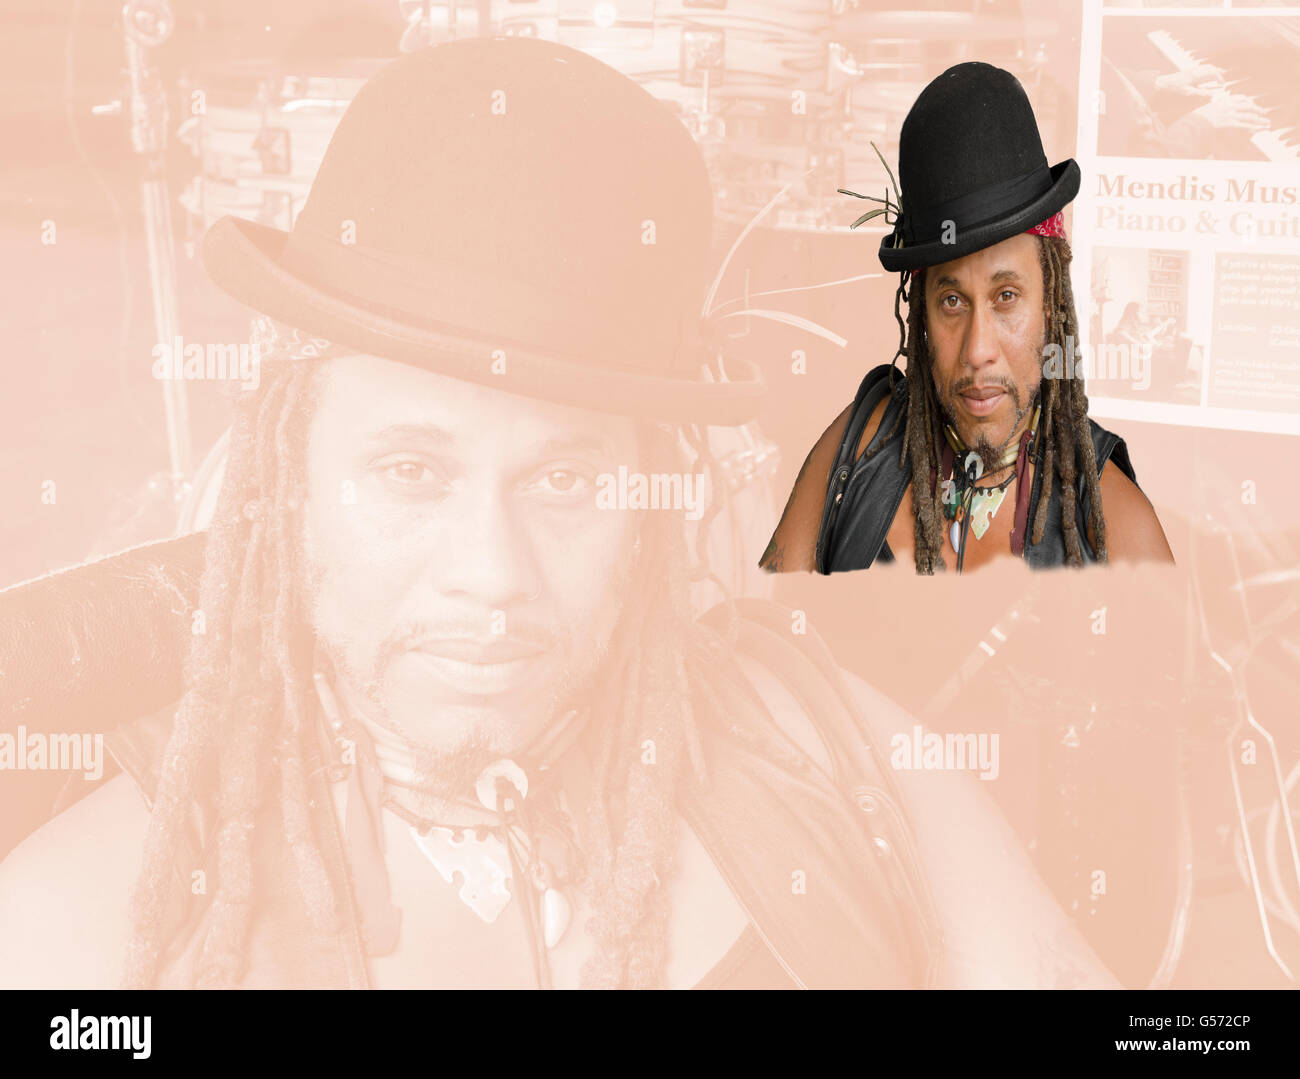 Phootgraph of Ant Hatcher - Musician and Actor Stock Photo